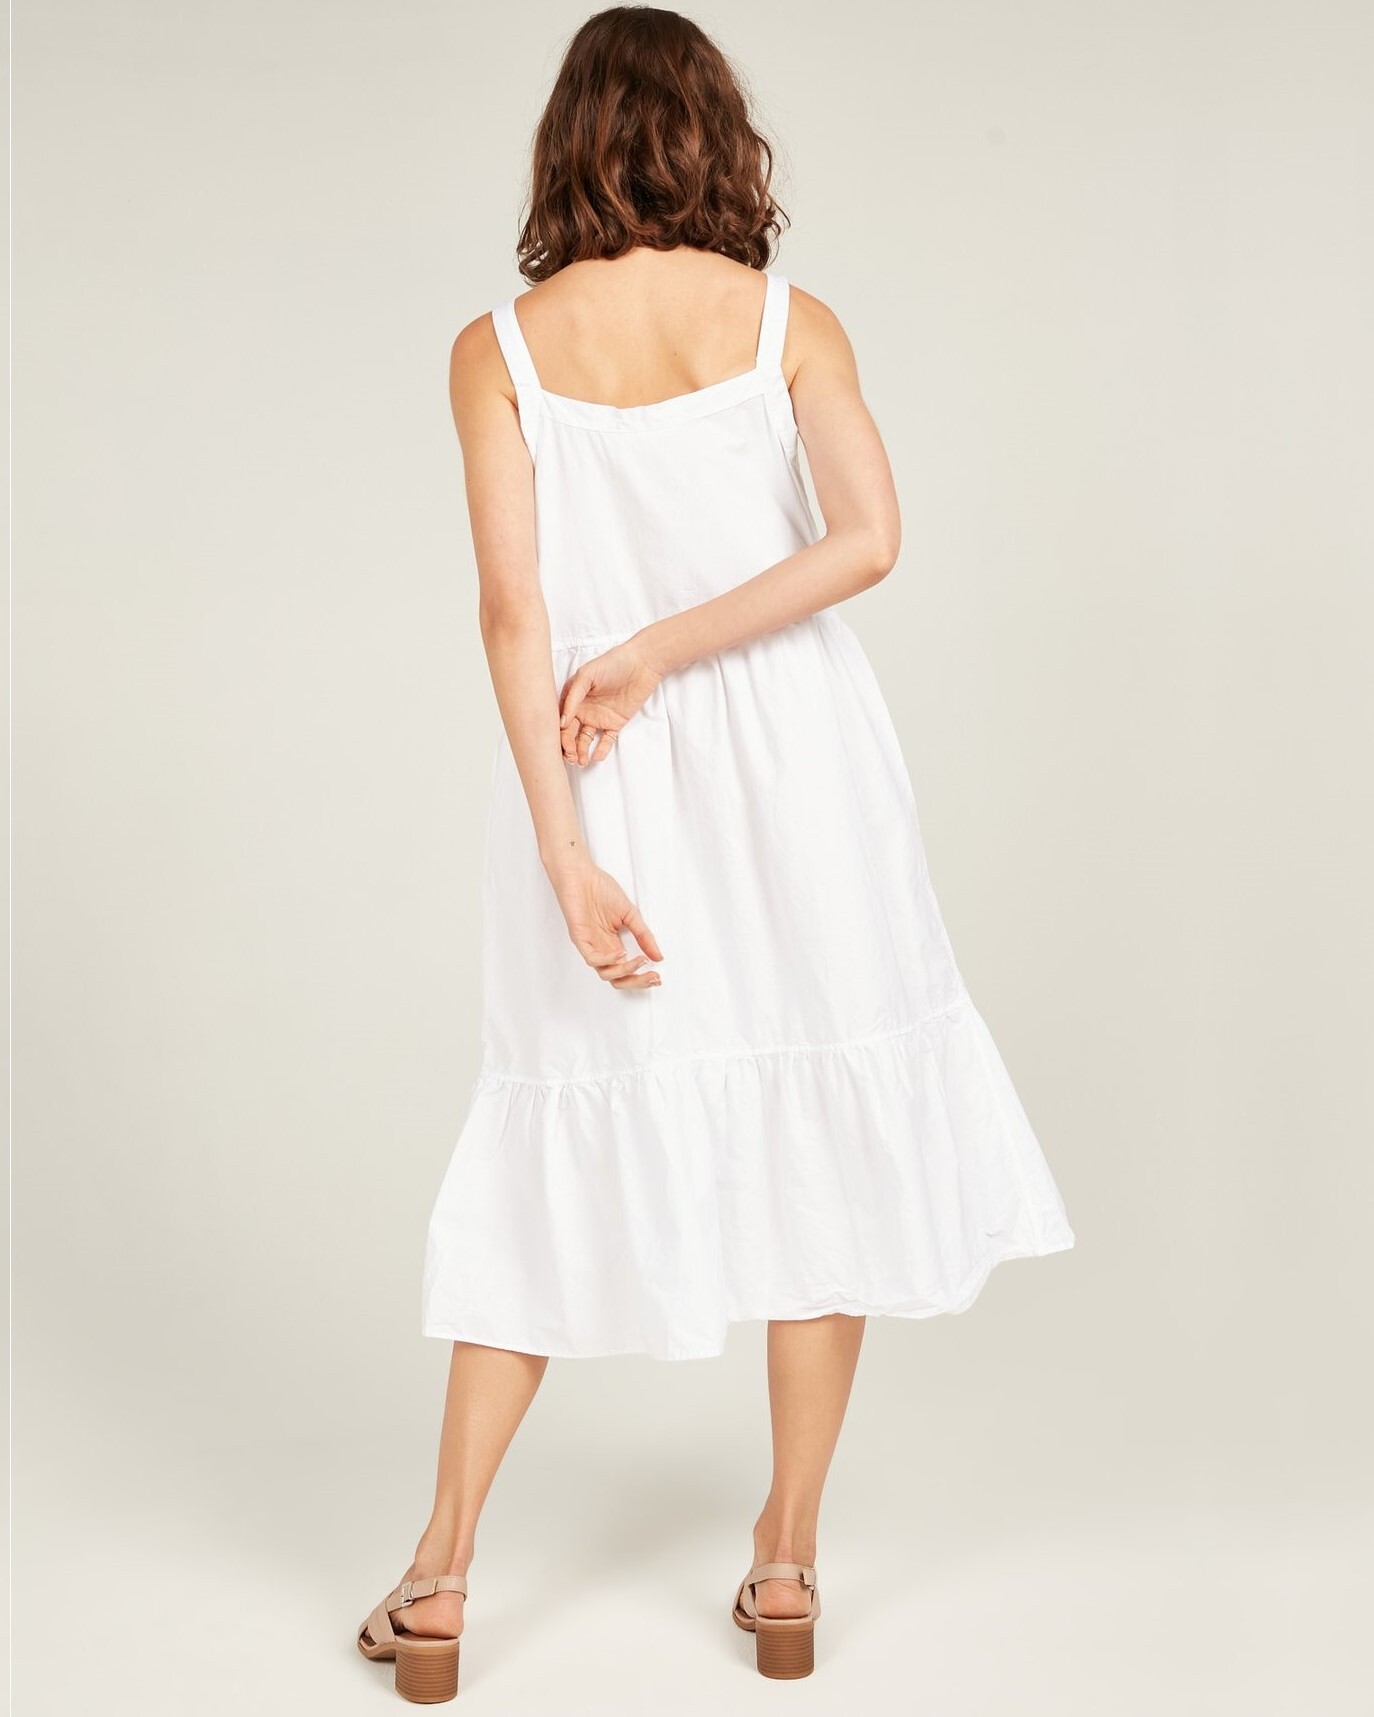 POSY SUNDRESS (BLANC)- PRIMNESS SUMMER 21 Boxing Day Sale